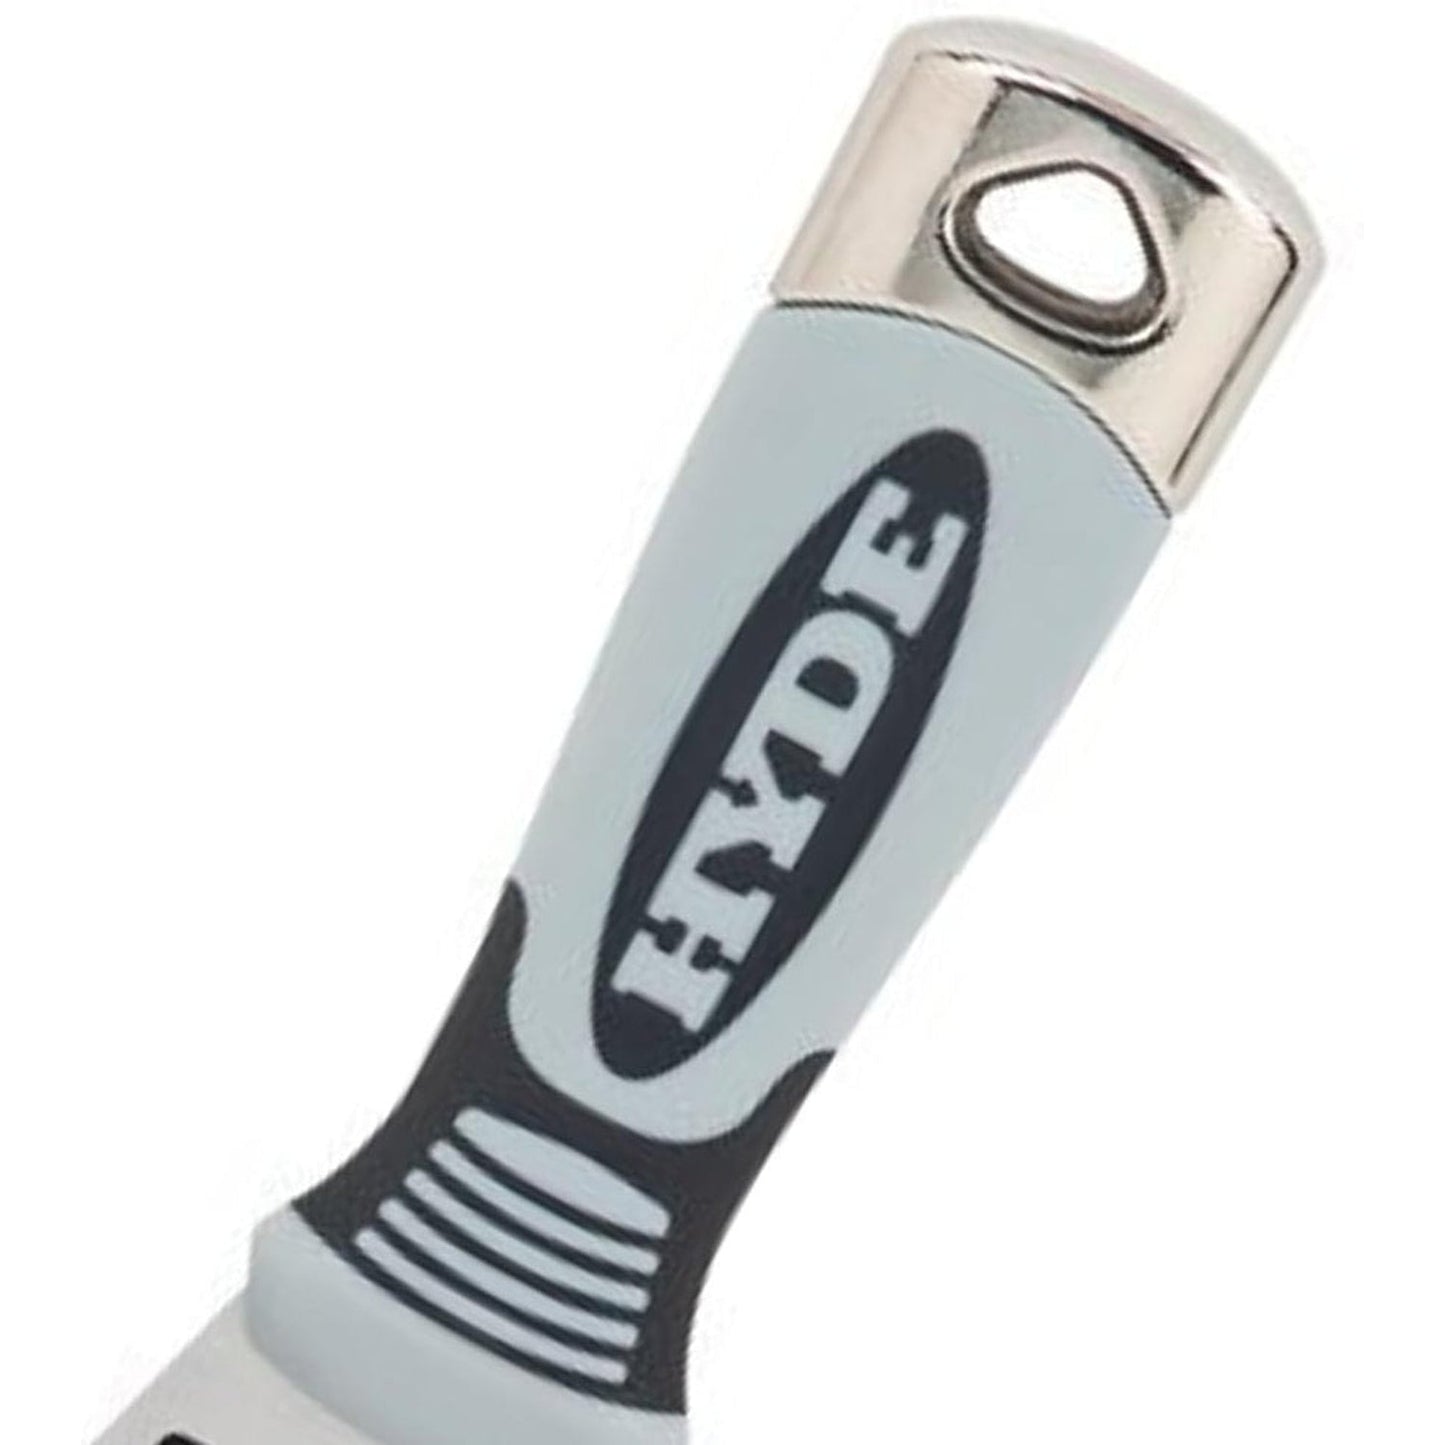 Hyde 06988 Pro Stainless Steel 8-in-1 Painters Tool 76mm (3")